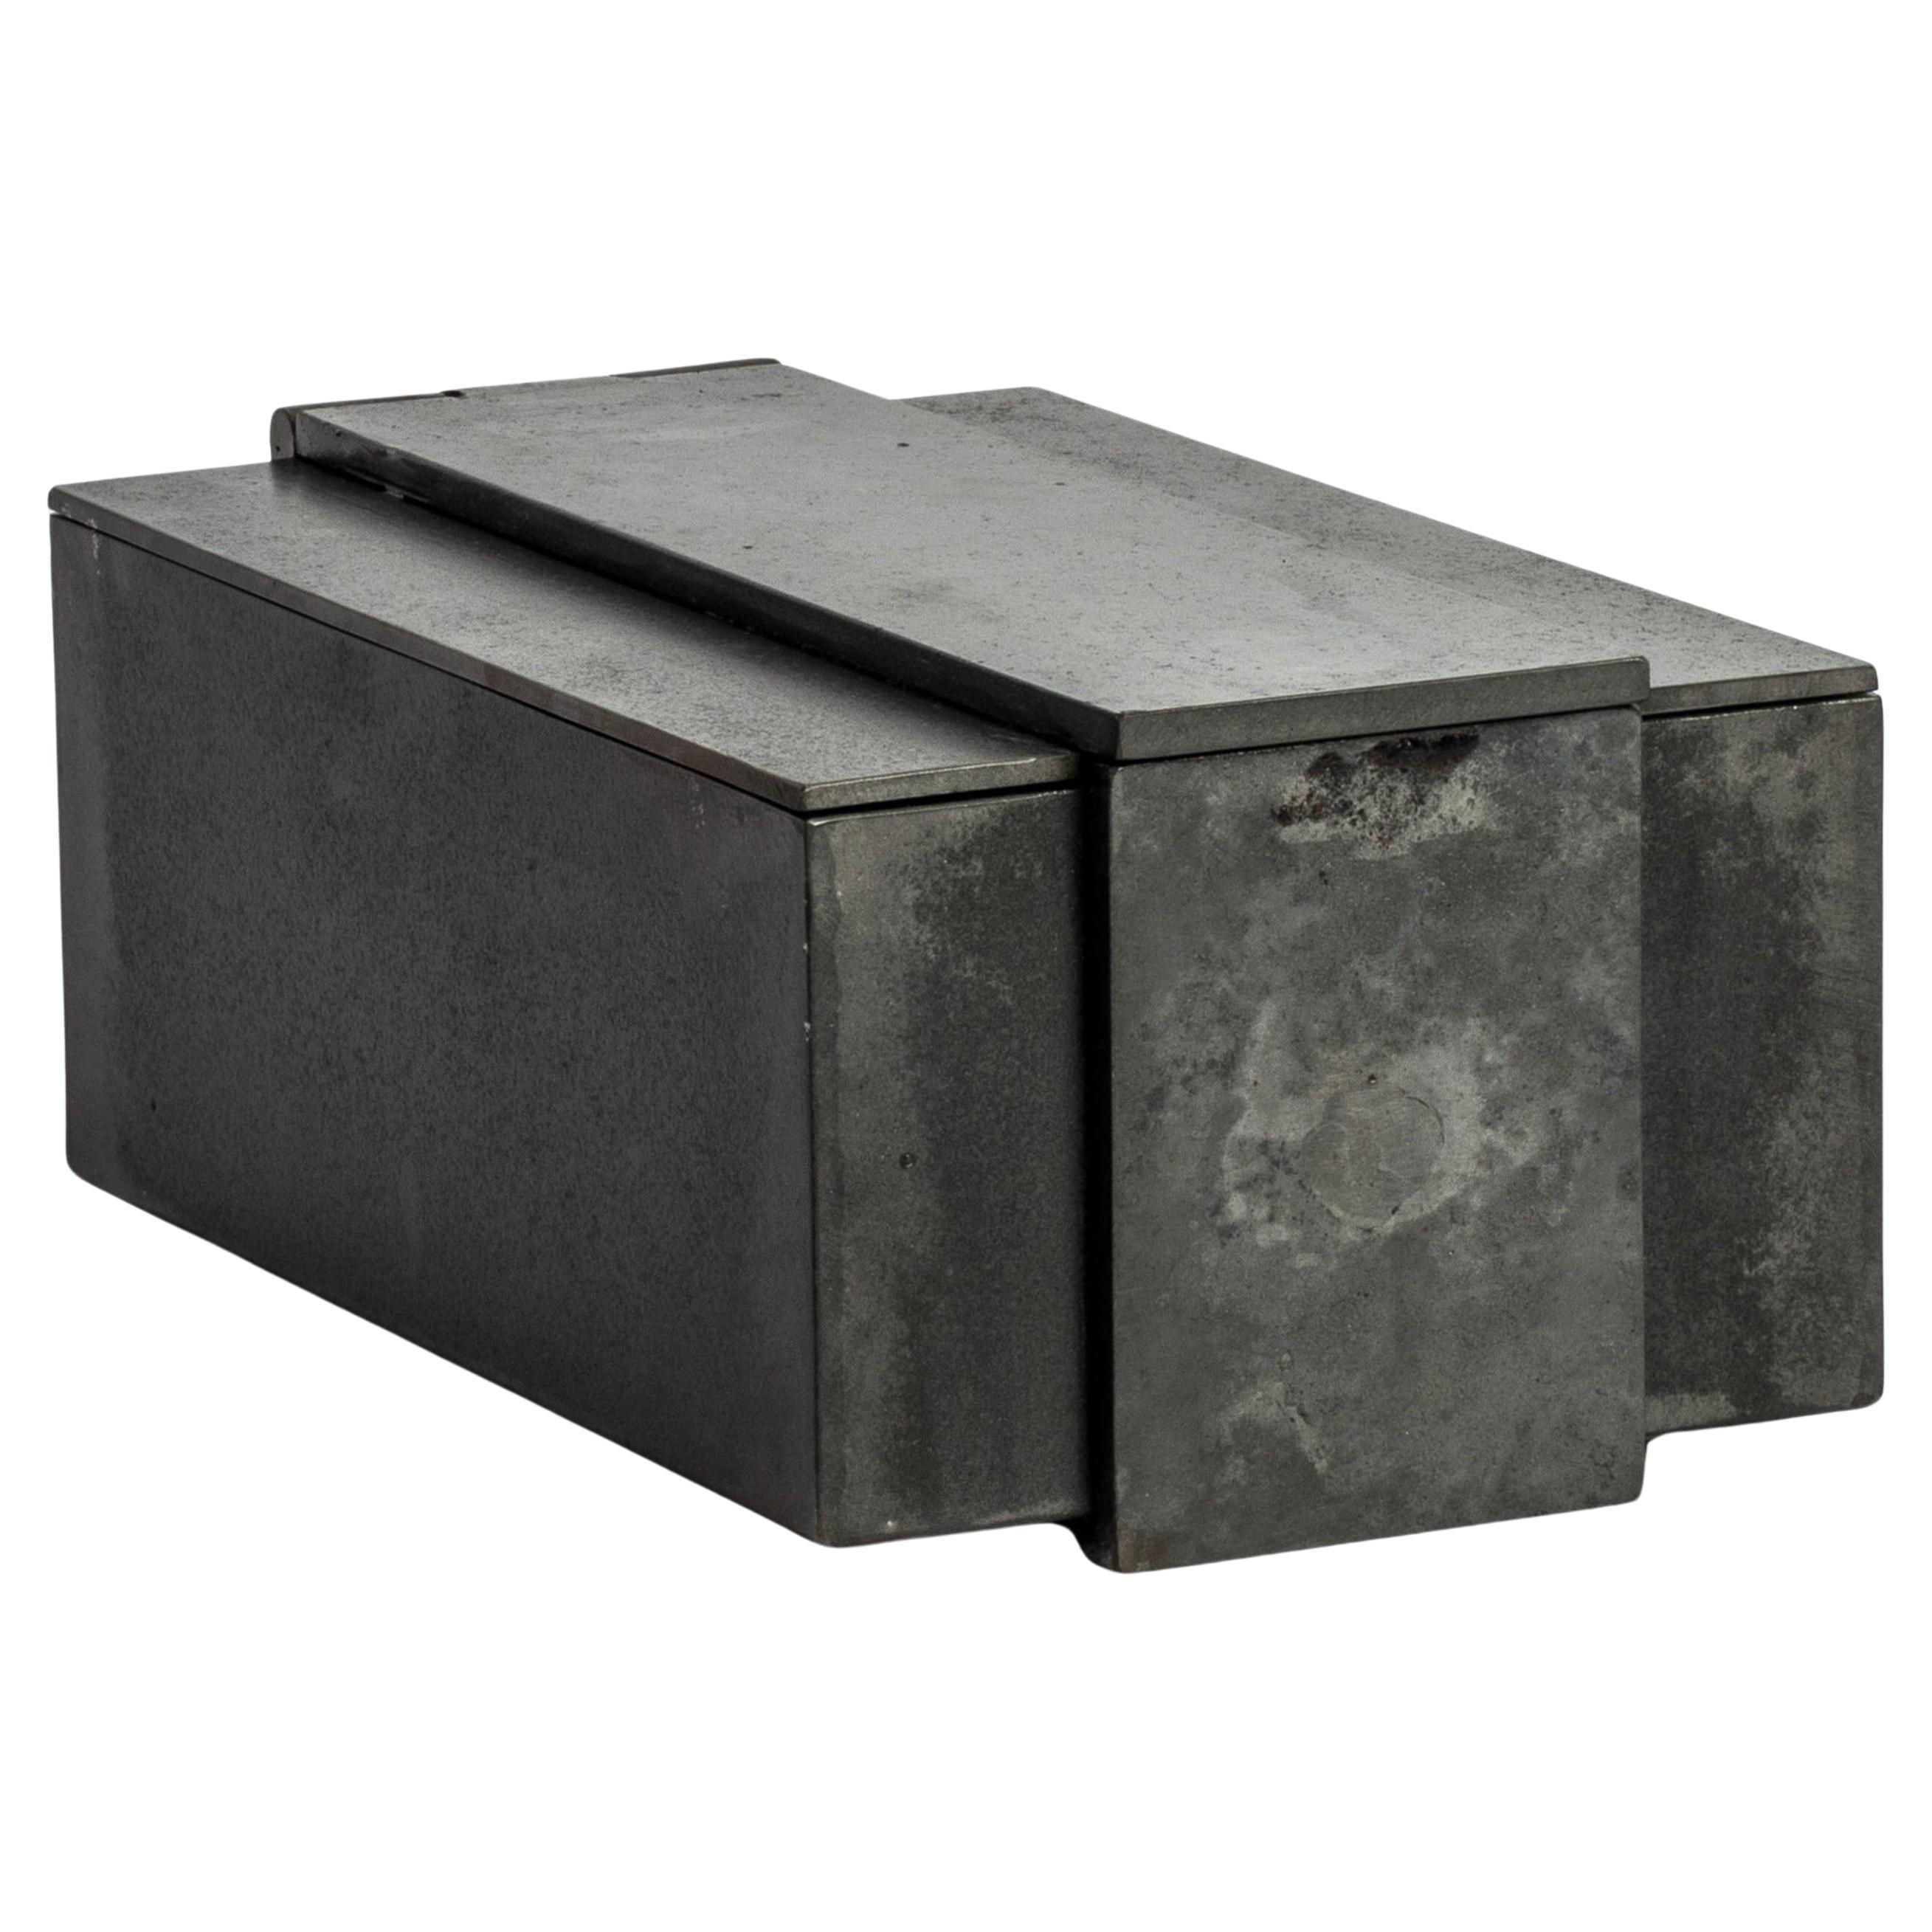 Base Metal Boxes and Cases